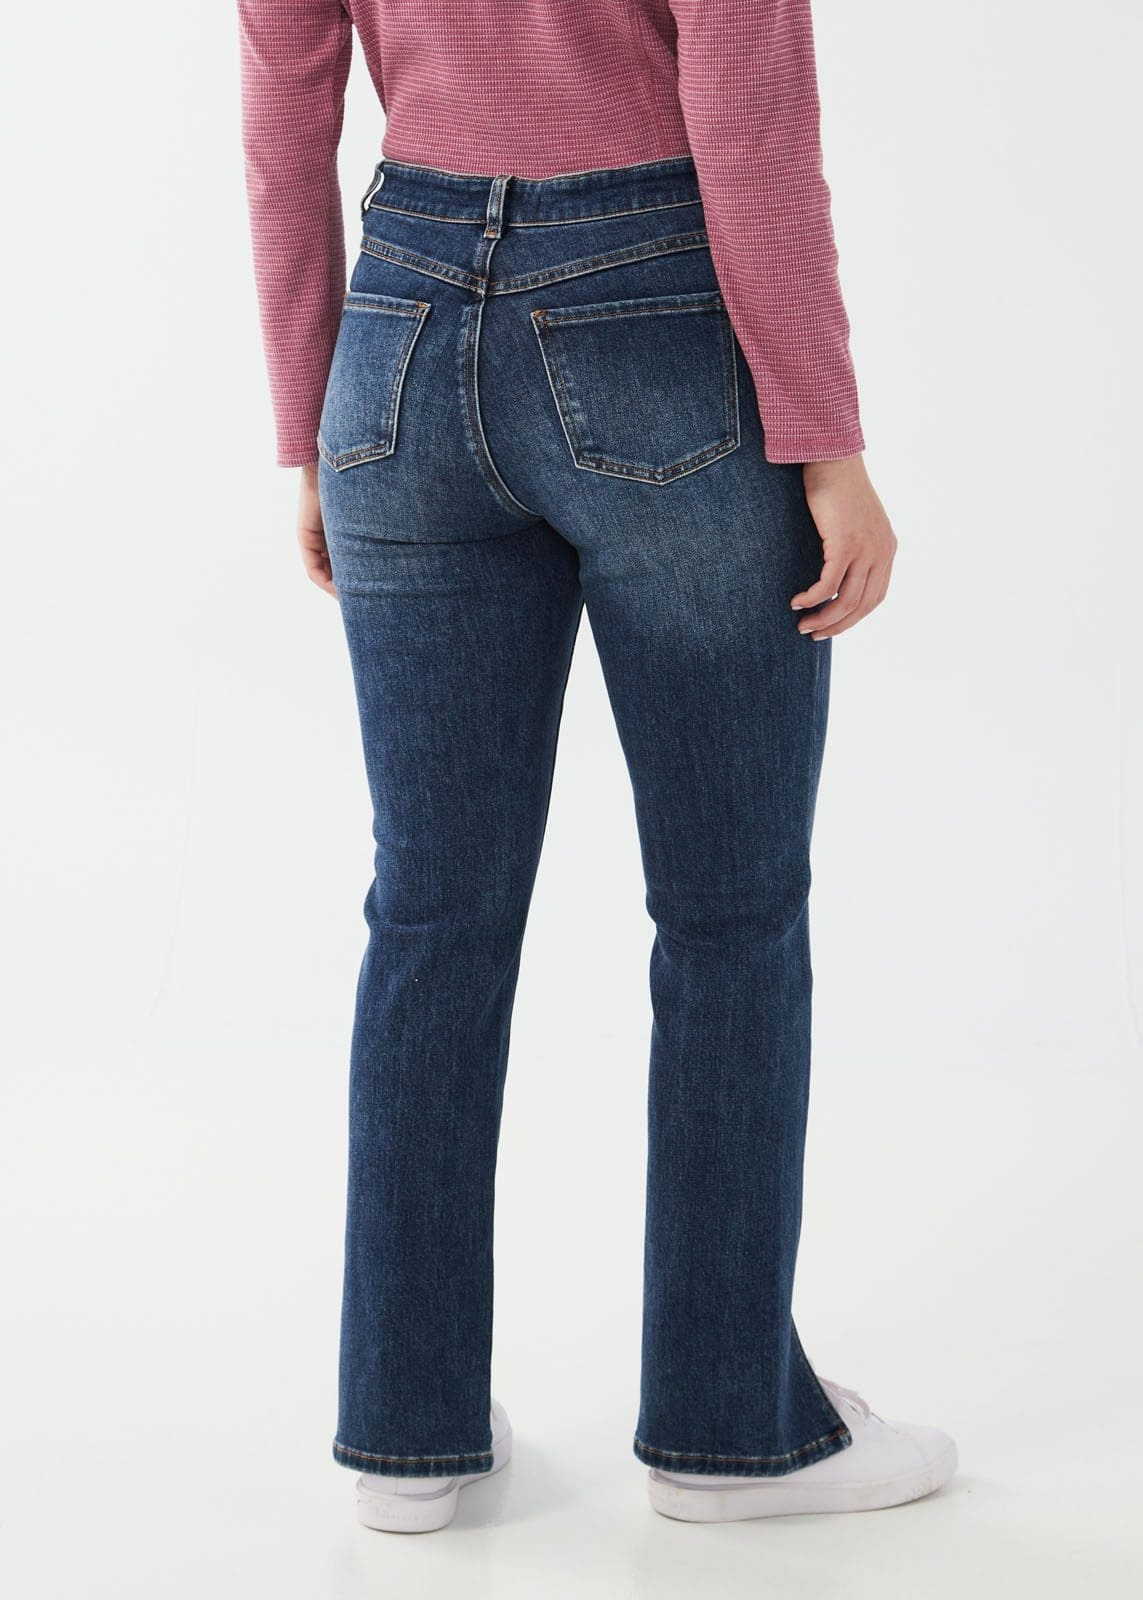 Suzanne Jeans with Front Slit